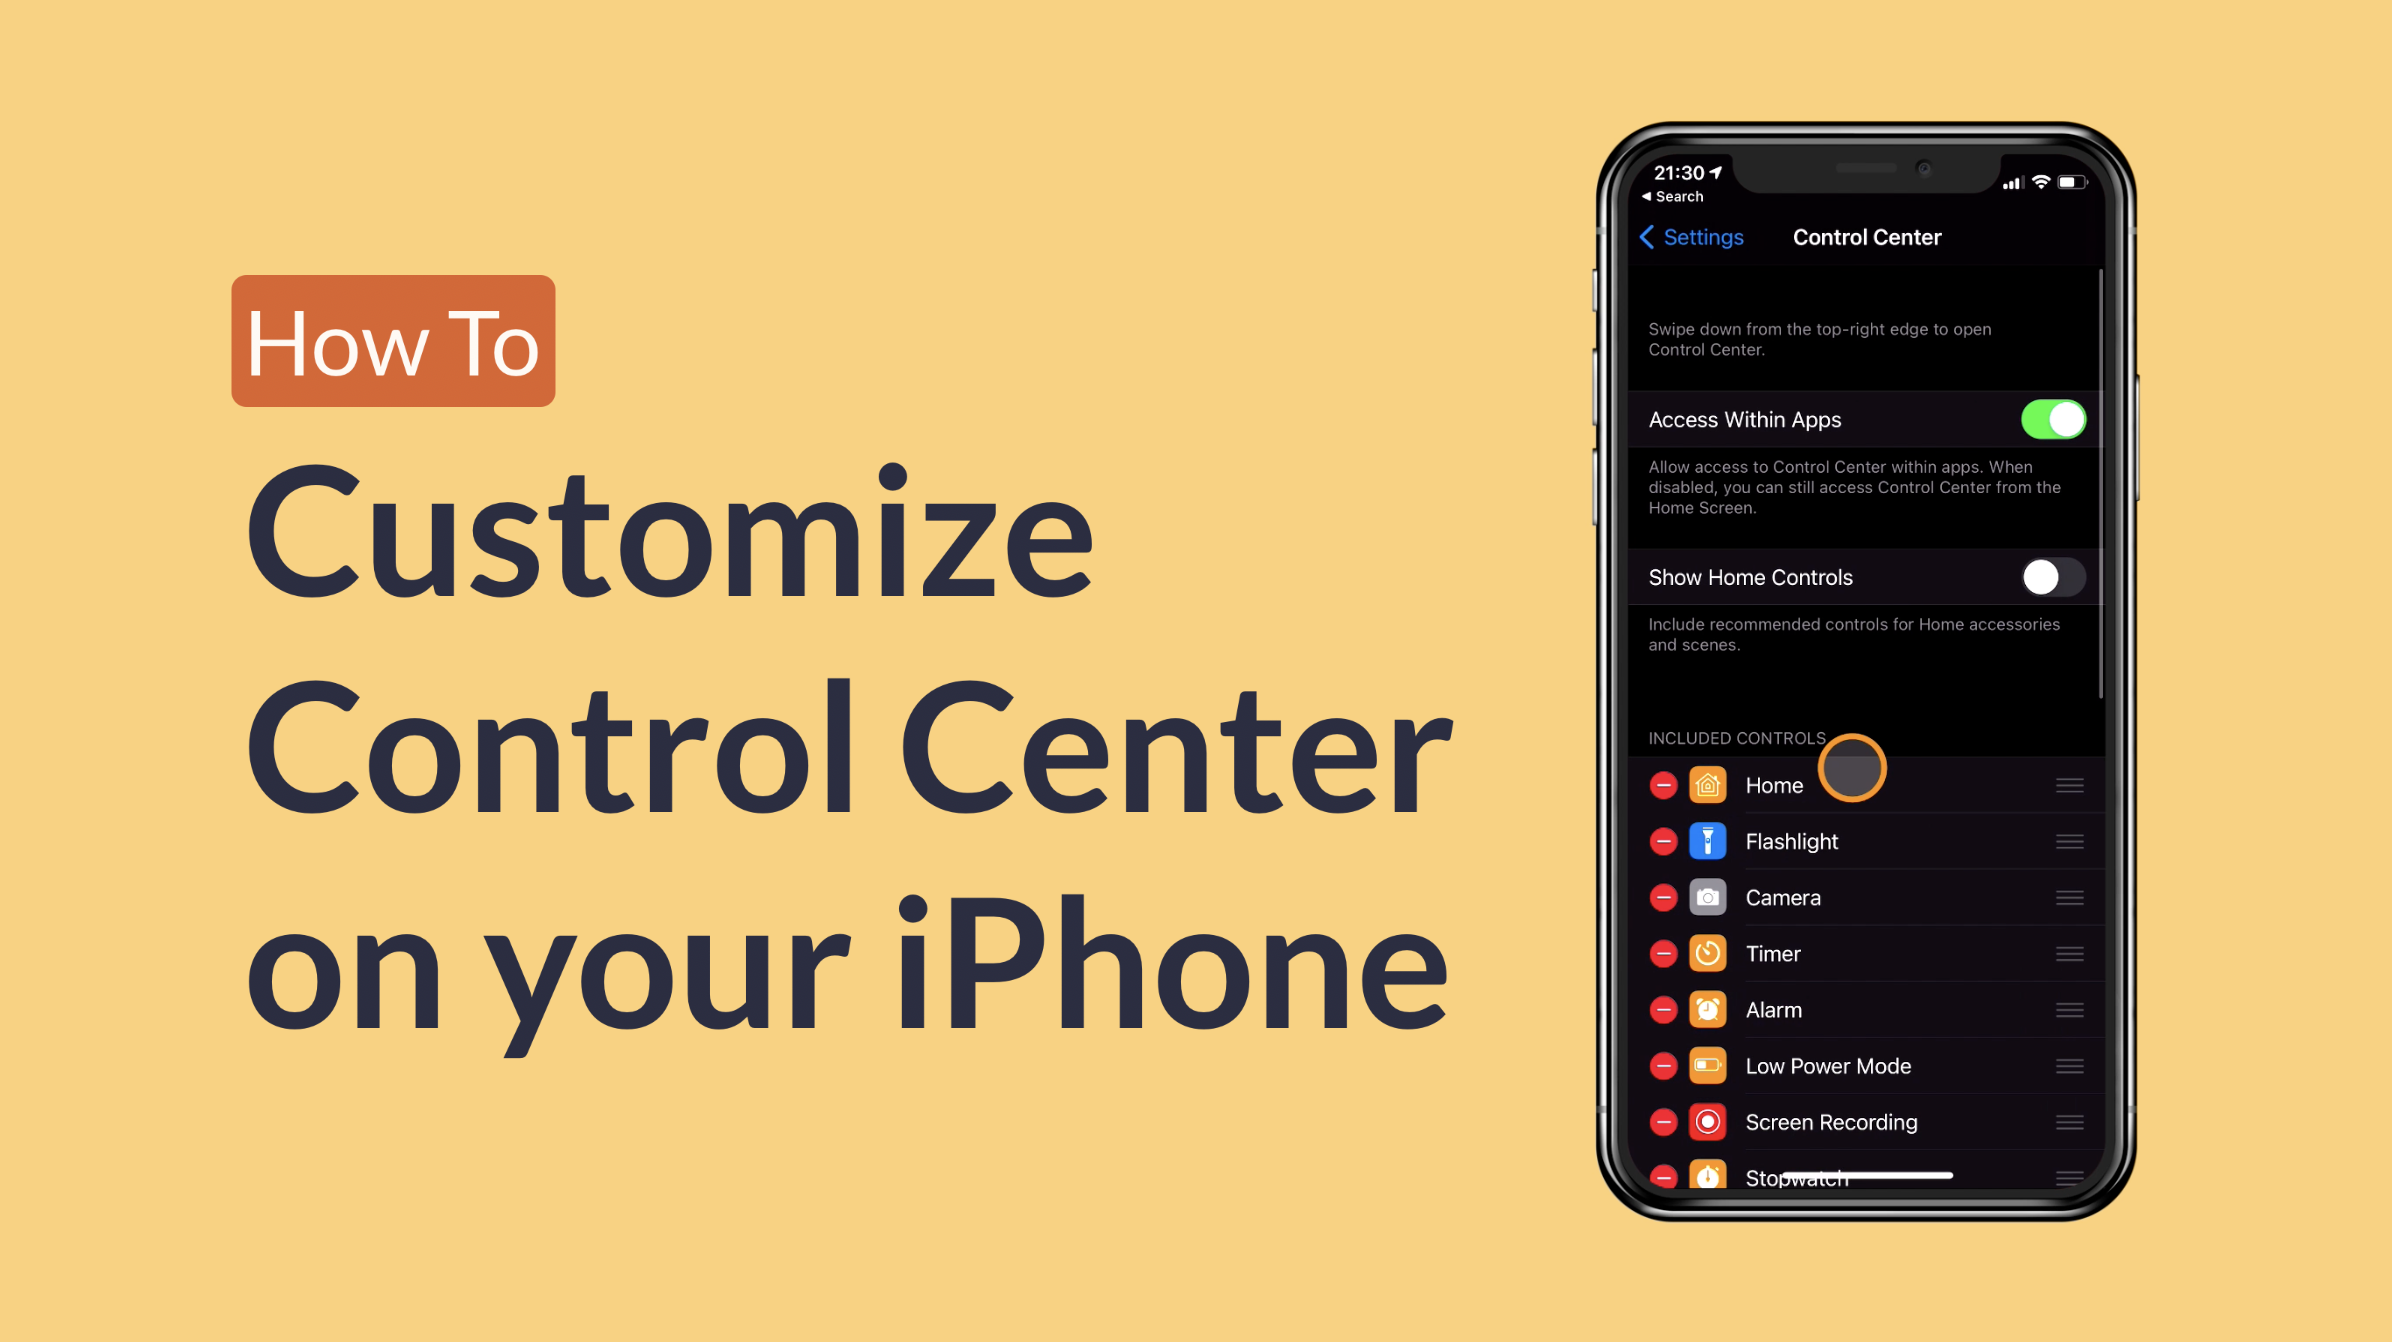 Control Center is one of the most useful, but hidden features on your phone. Not only can you control your music, turn on and off Airplane Mode, adjust the brightness and sound levels, and so, so much more, but you can also fully customize Control Center.